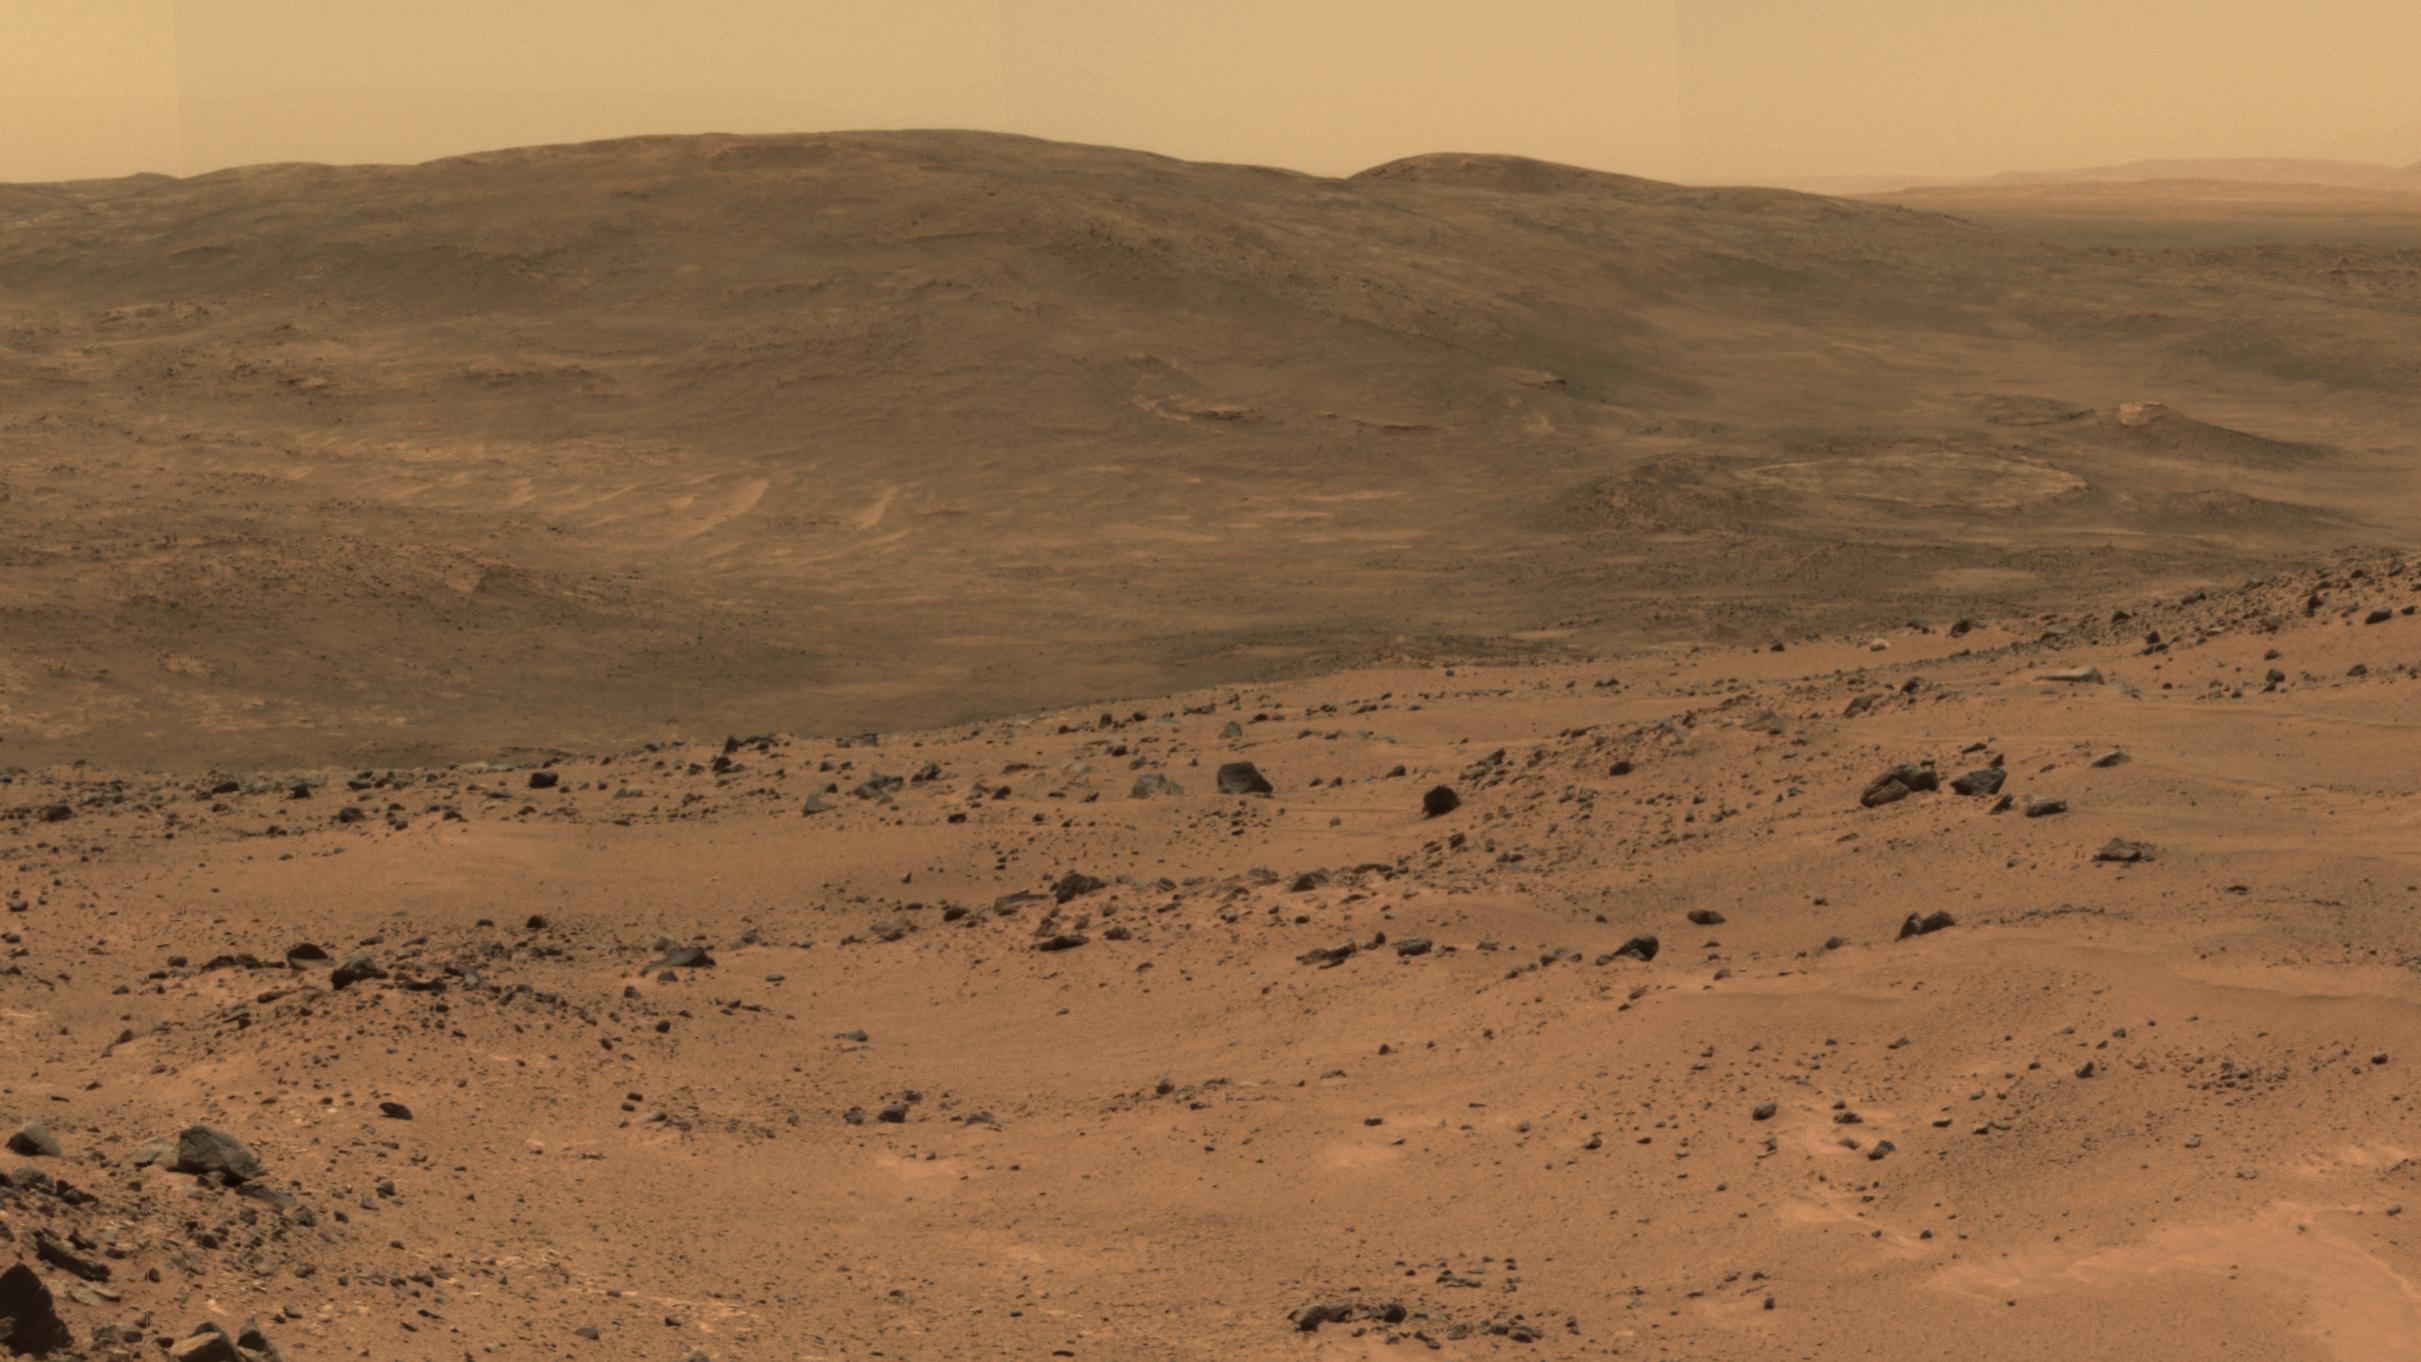 After climbing Husband Hill, Spirit spent more than four years exploring locations within this view, including the "Comanche" outcrop and the "Home Plate" area.